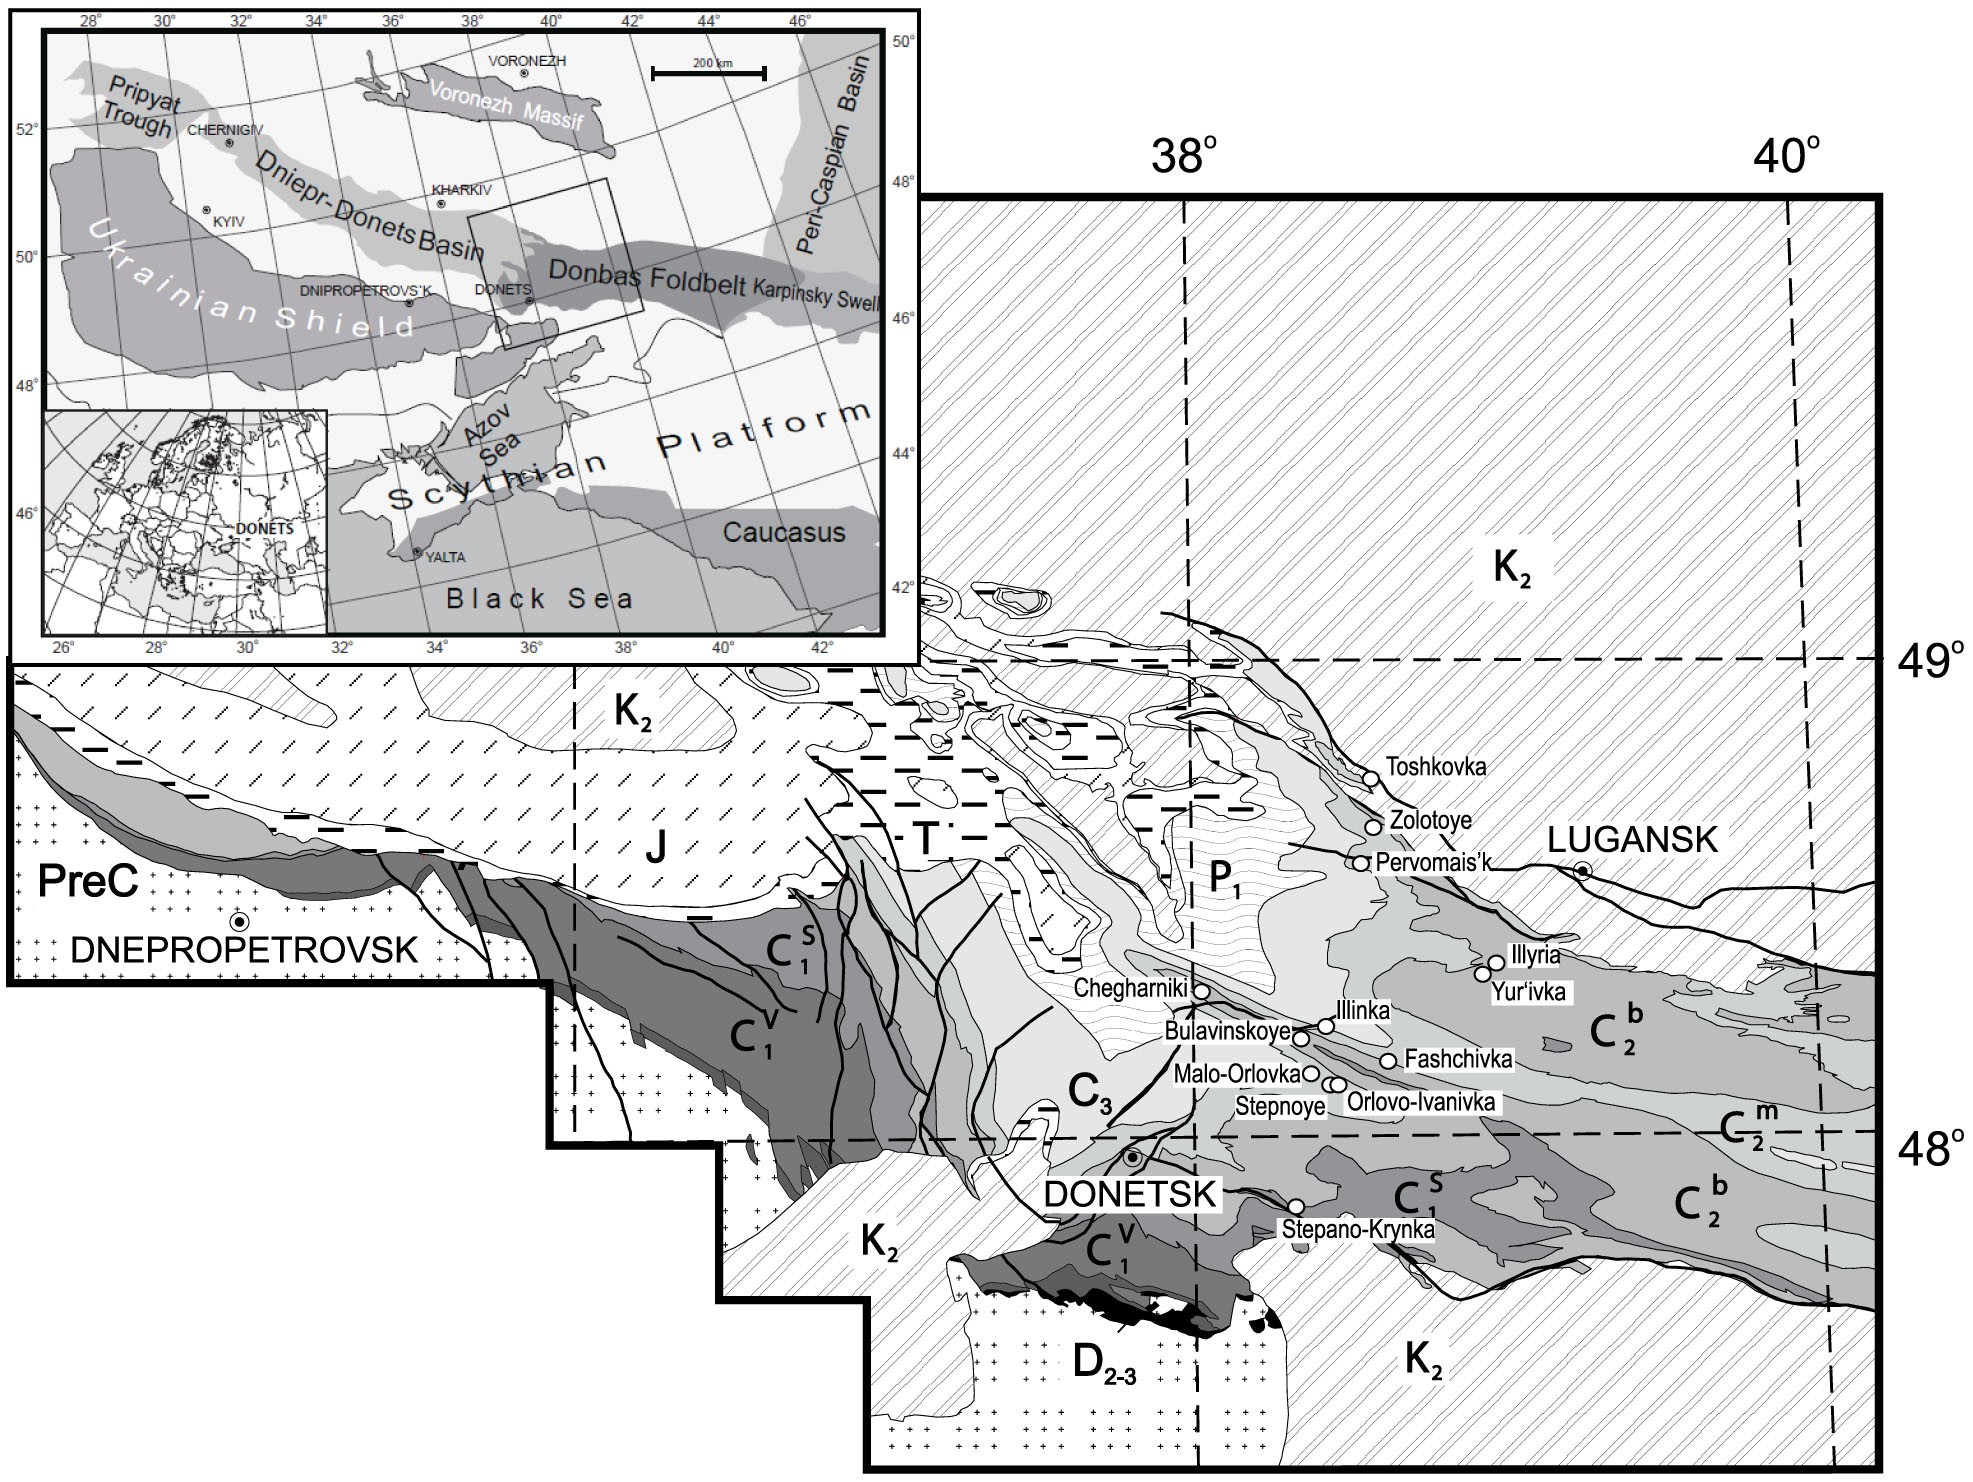 Sedimentary geology of the middle Carboniferous of the Donbas region  (Dniepr-Donets basin, Ukraine) | Scientific Reports